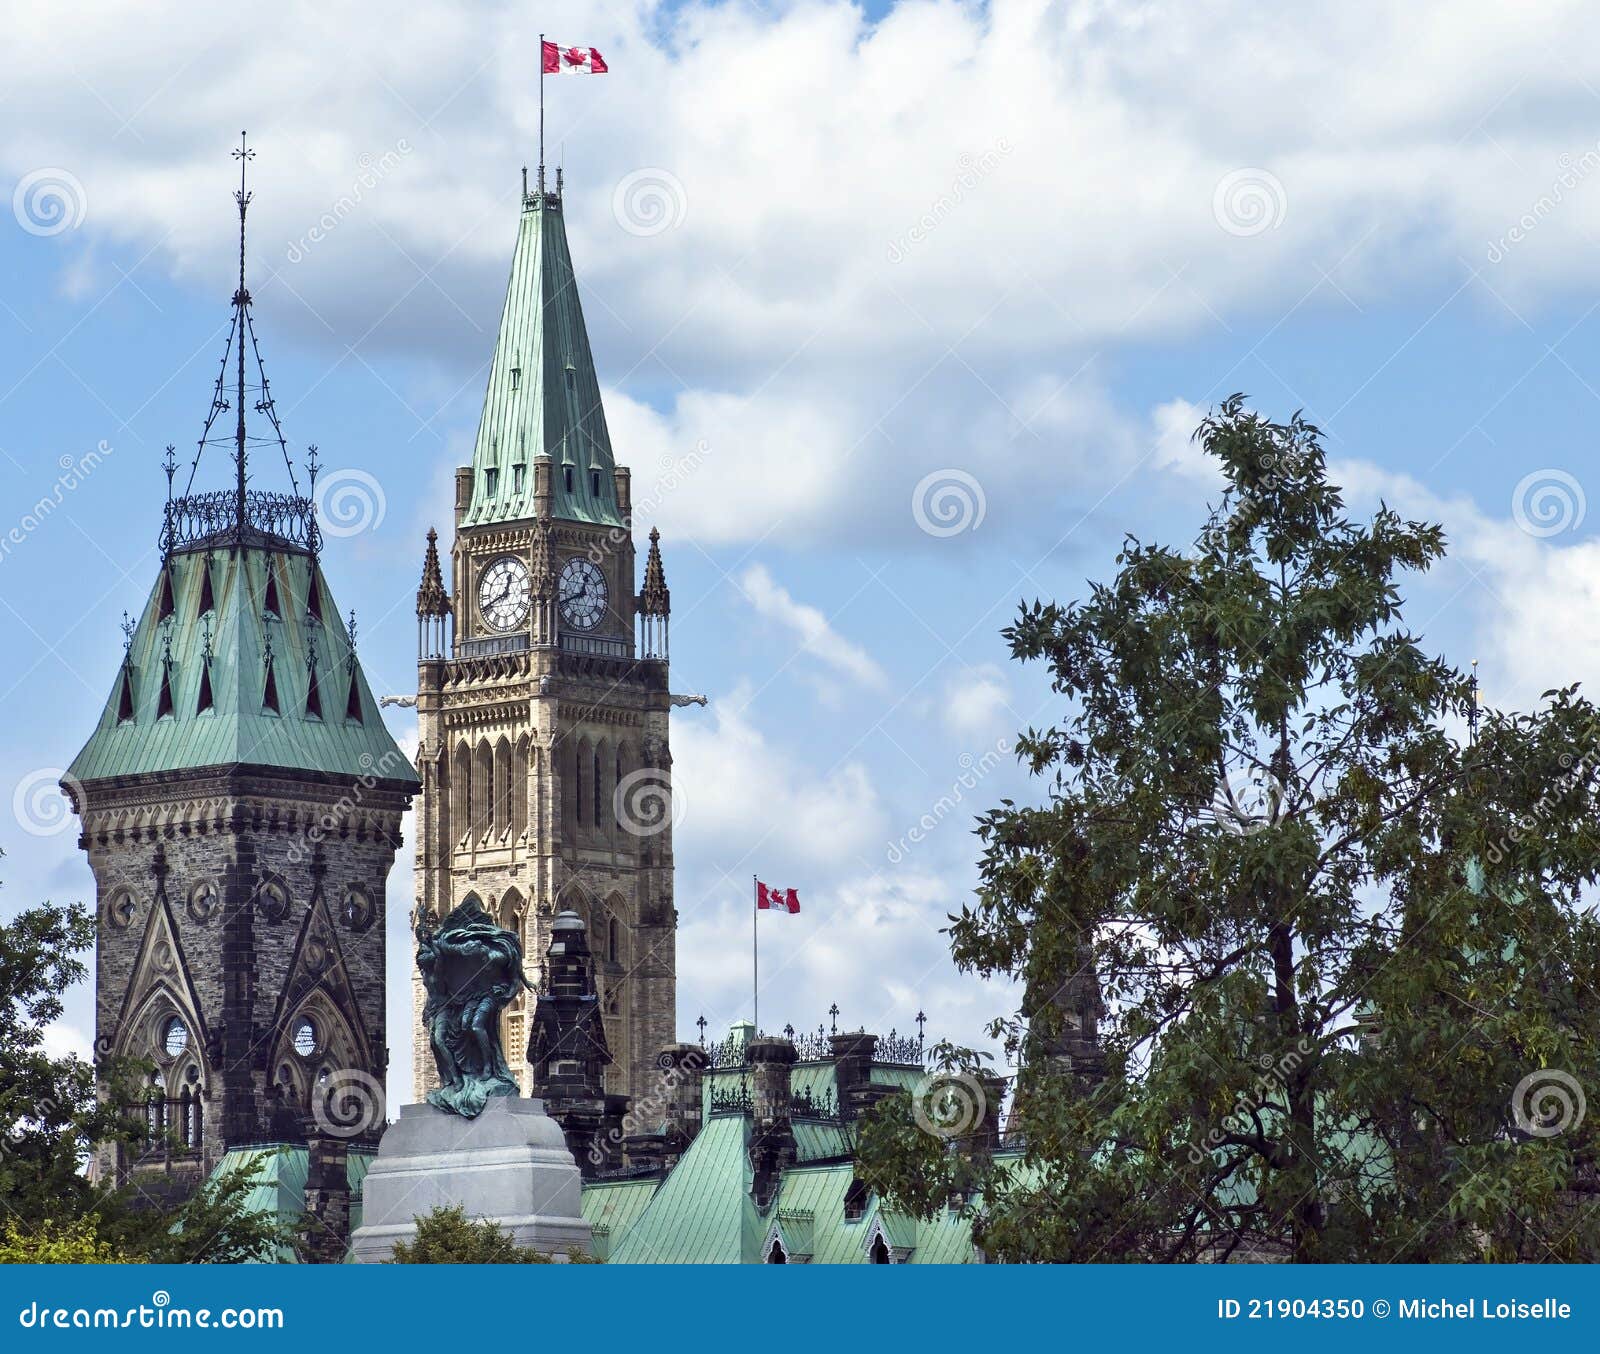 Political Towers. The Canadian Parliament featuring the East and Centre Block towers.